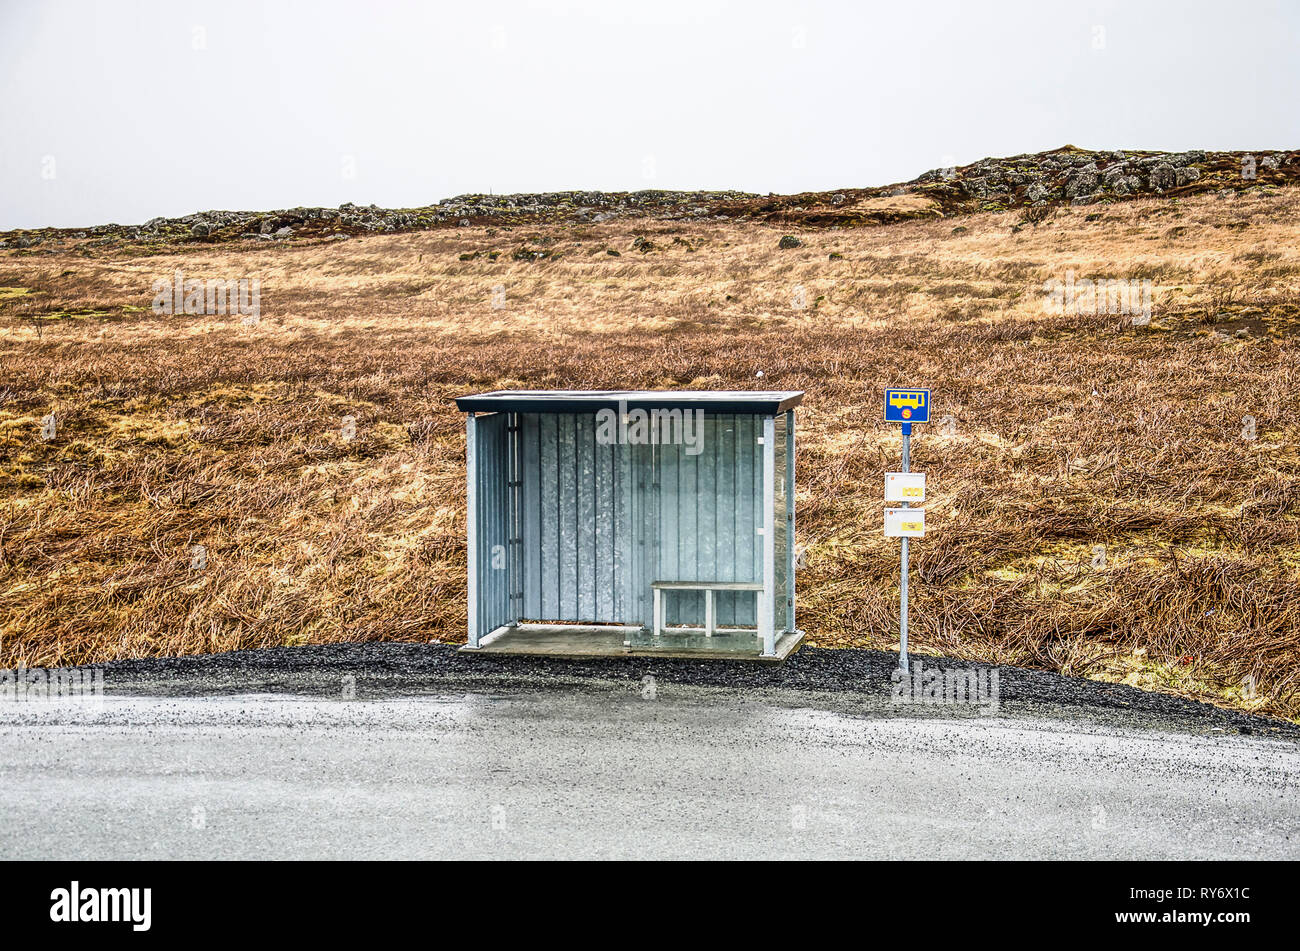 Reykjanes peninsula, March 1, 2019: little metal shelter at a busstop in a deserted landscape on a rainy day Stock Photo